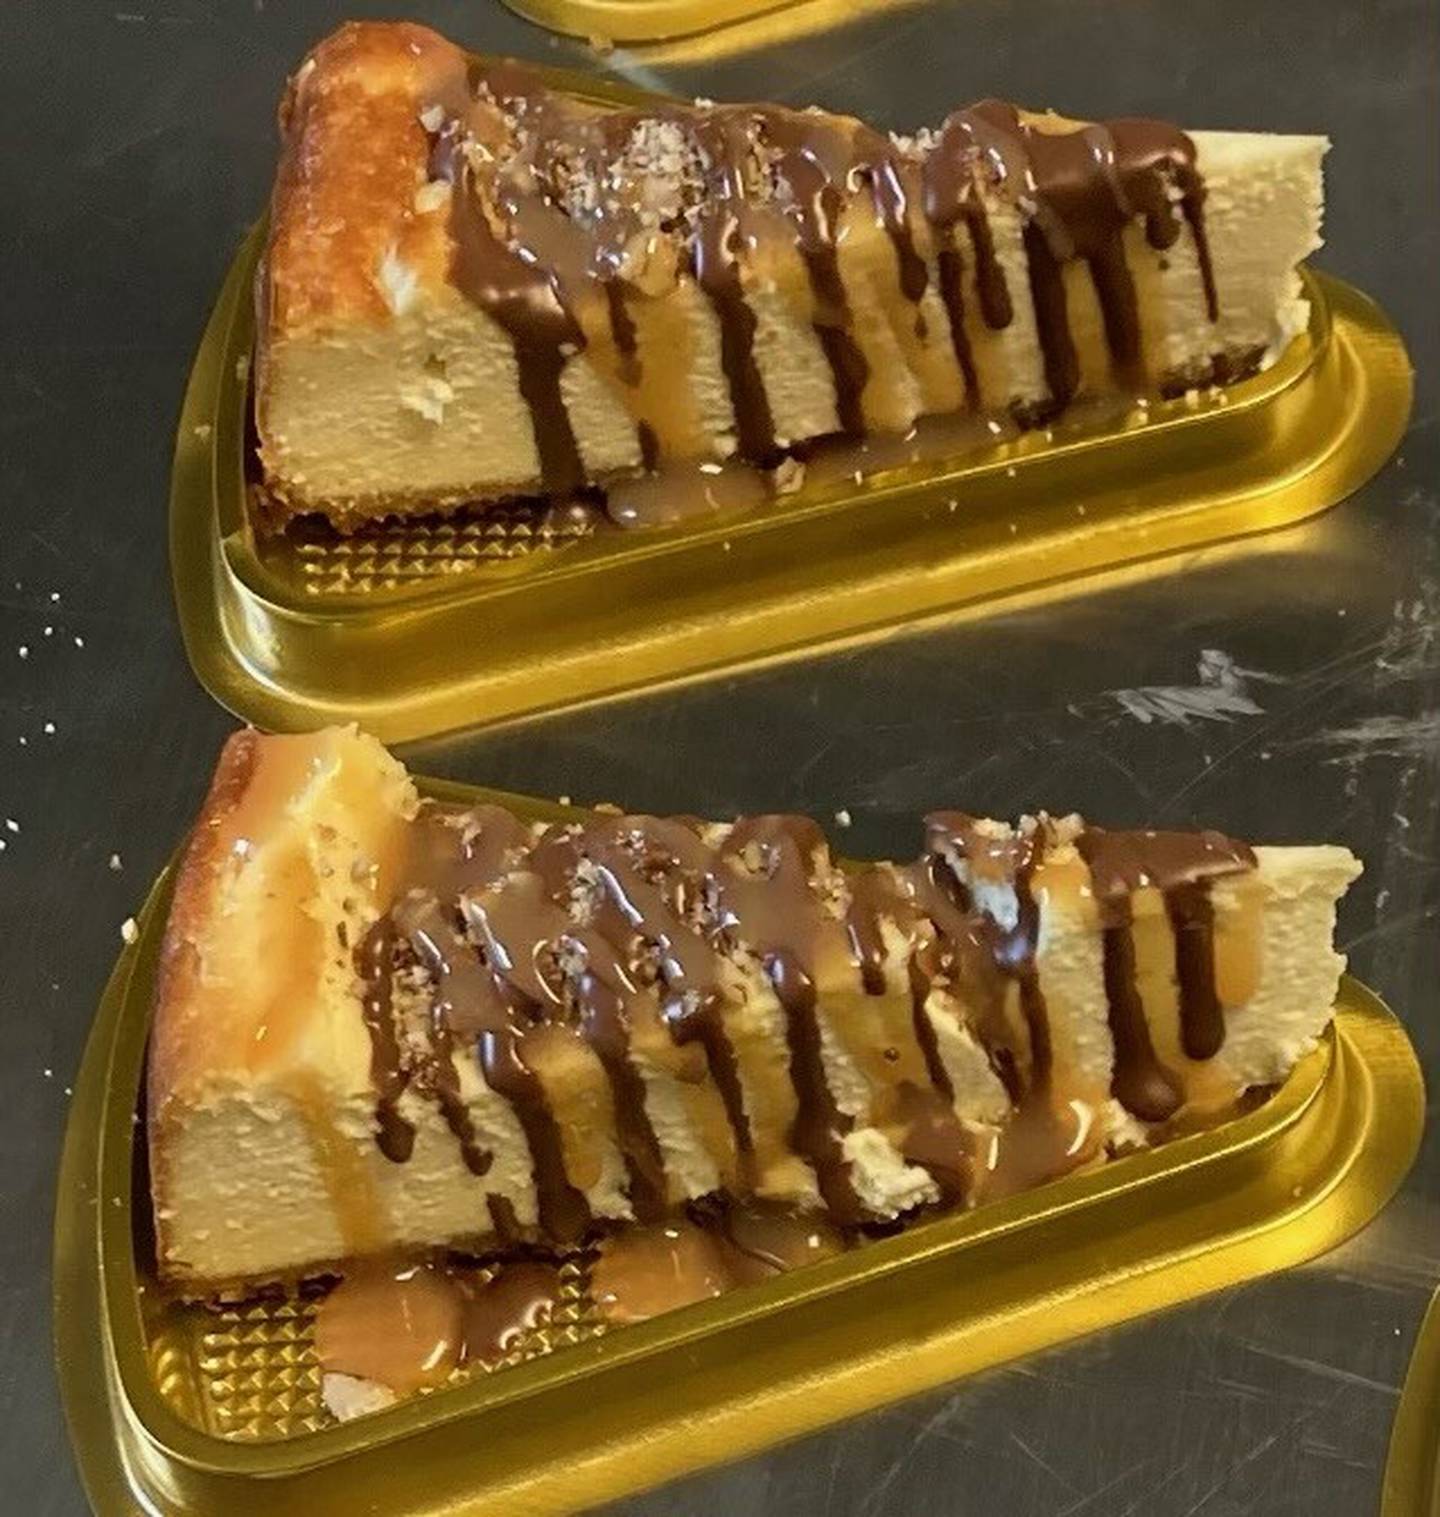 Chatton said the turtle cheesecake seems to be a “fan favorite”  and is a traditional vanilla cake topped with pecans caramel sauce, and chocolate.